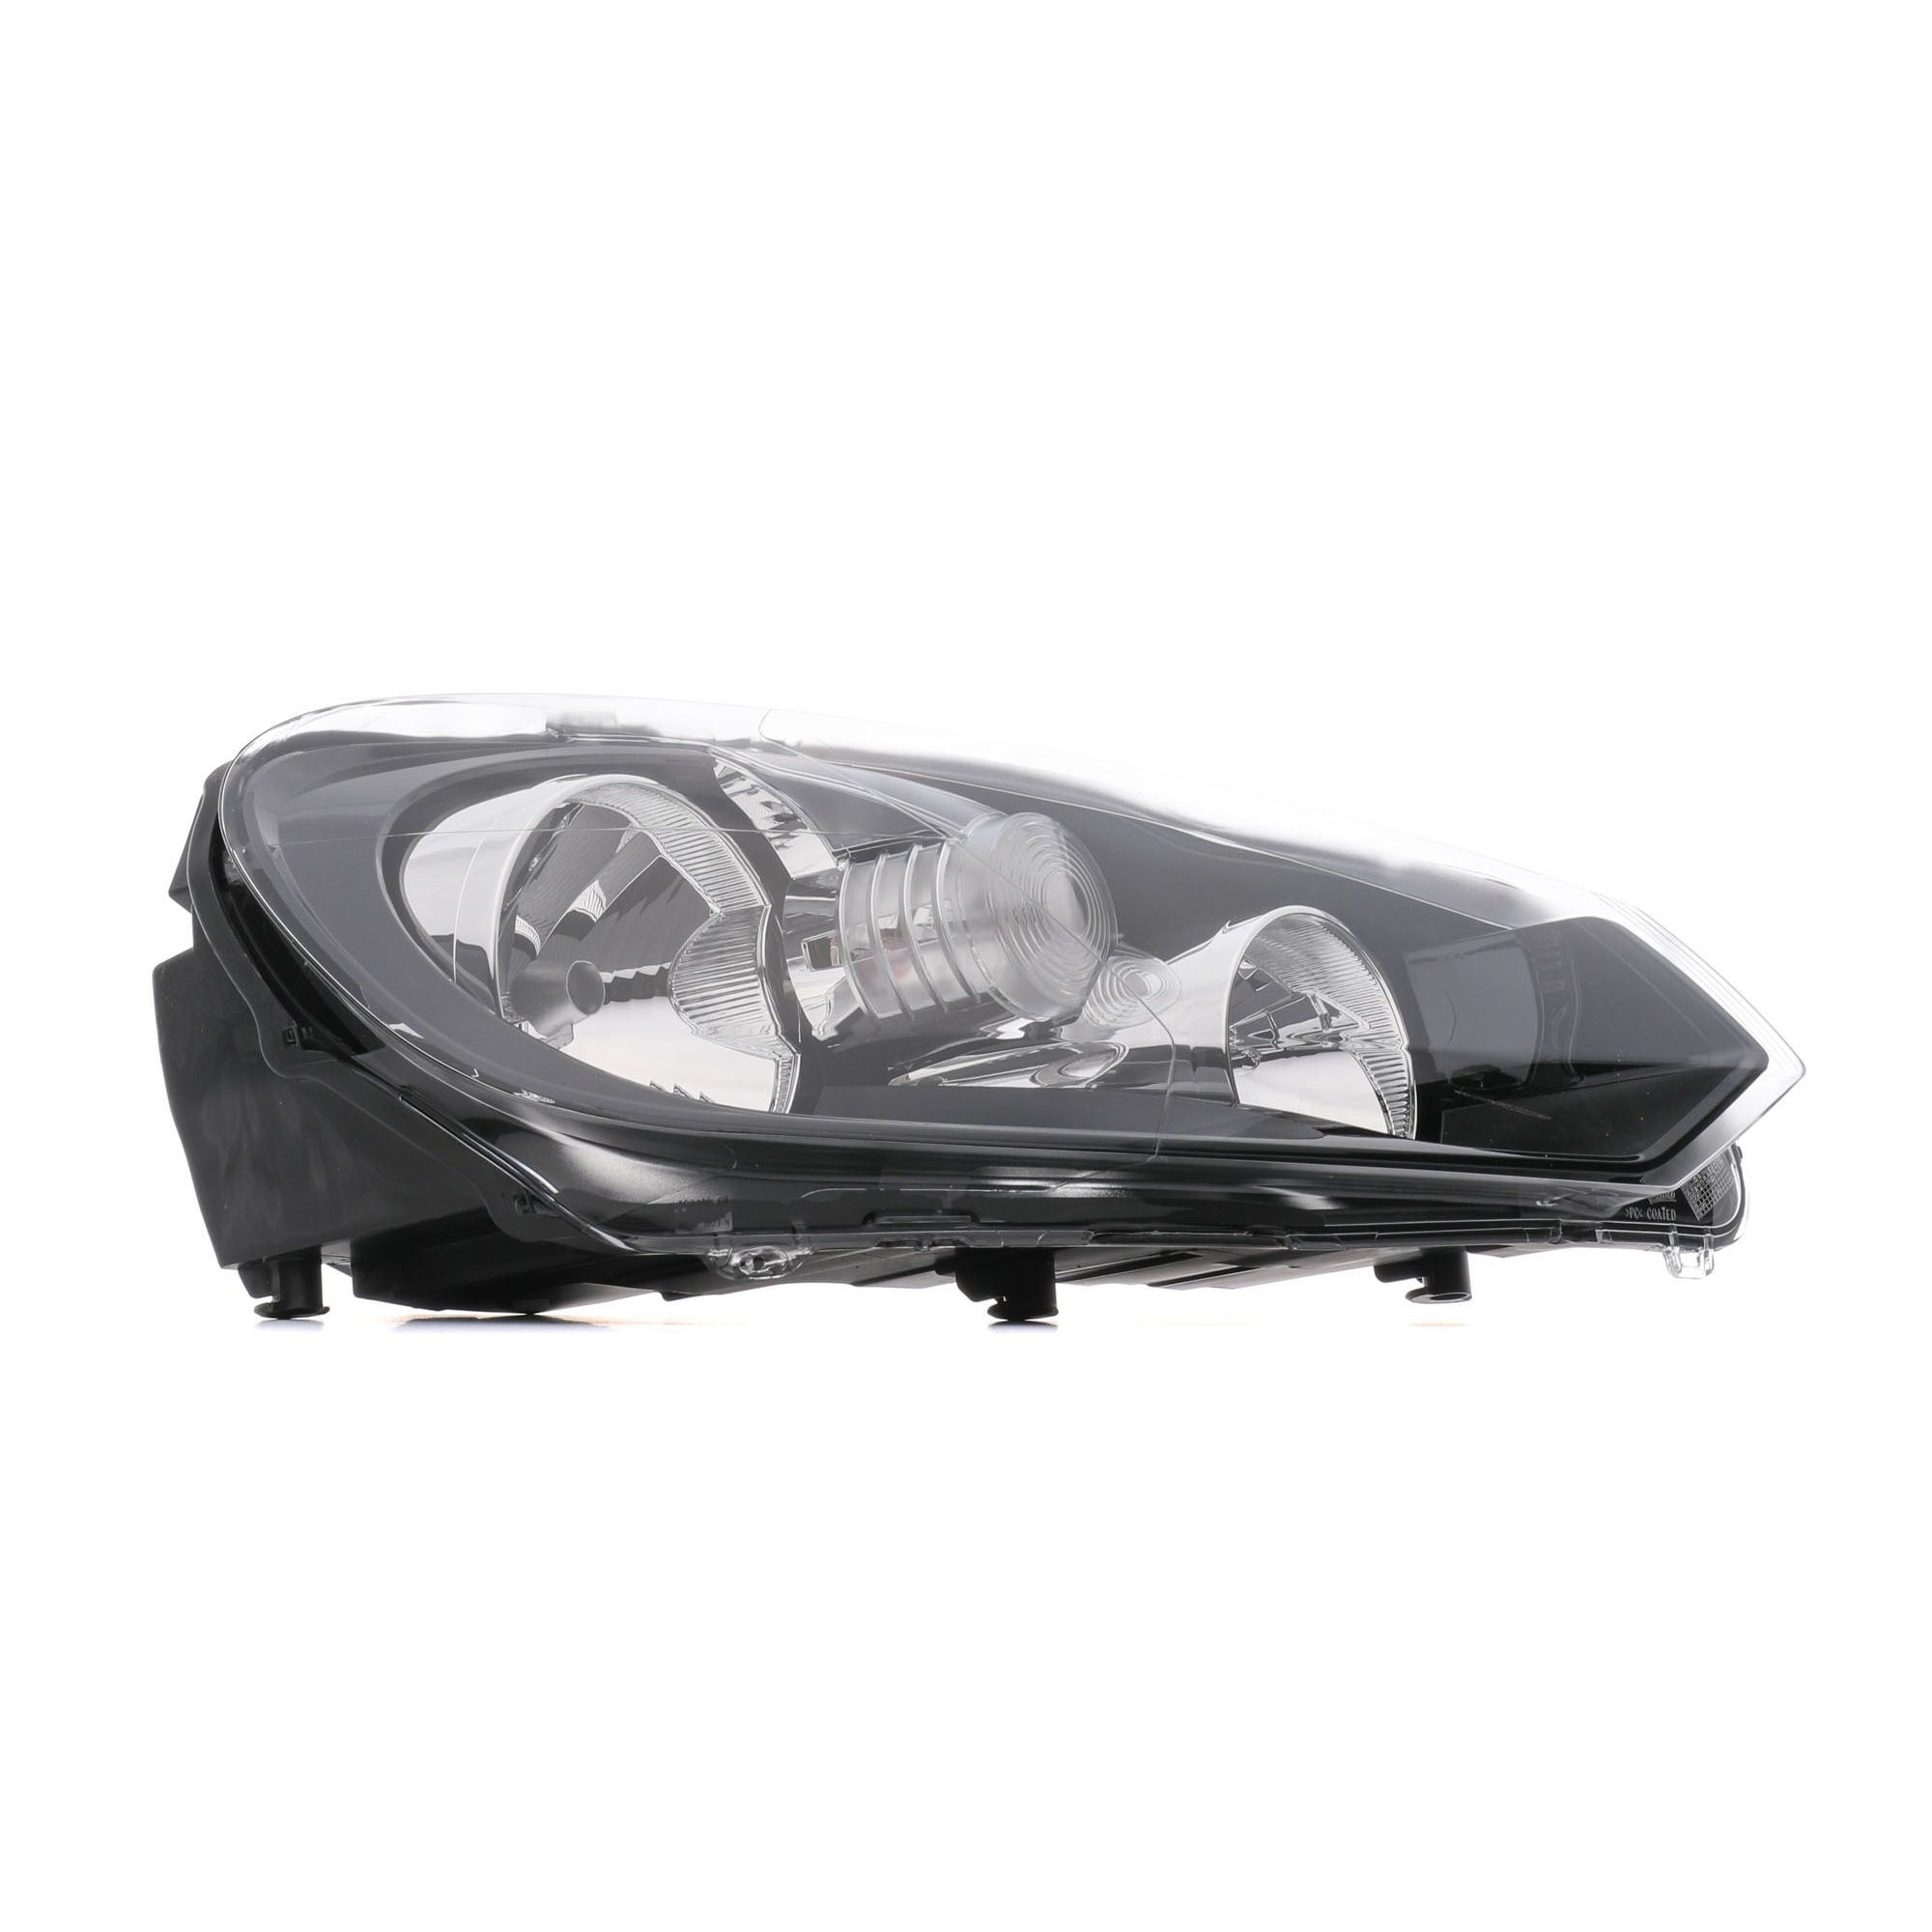 043851 VALEO Headlight IVECO Right, H7, H15, W5W, PSY24W, Halogen, transparent, with low beam, with daytime running light, for right-hand traffic, ORIGINAL PART, without motor for headlamp levelling